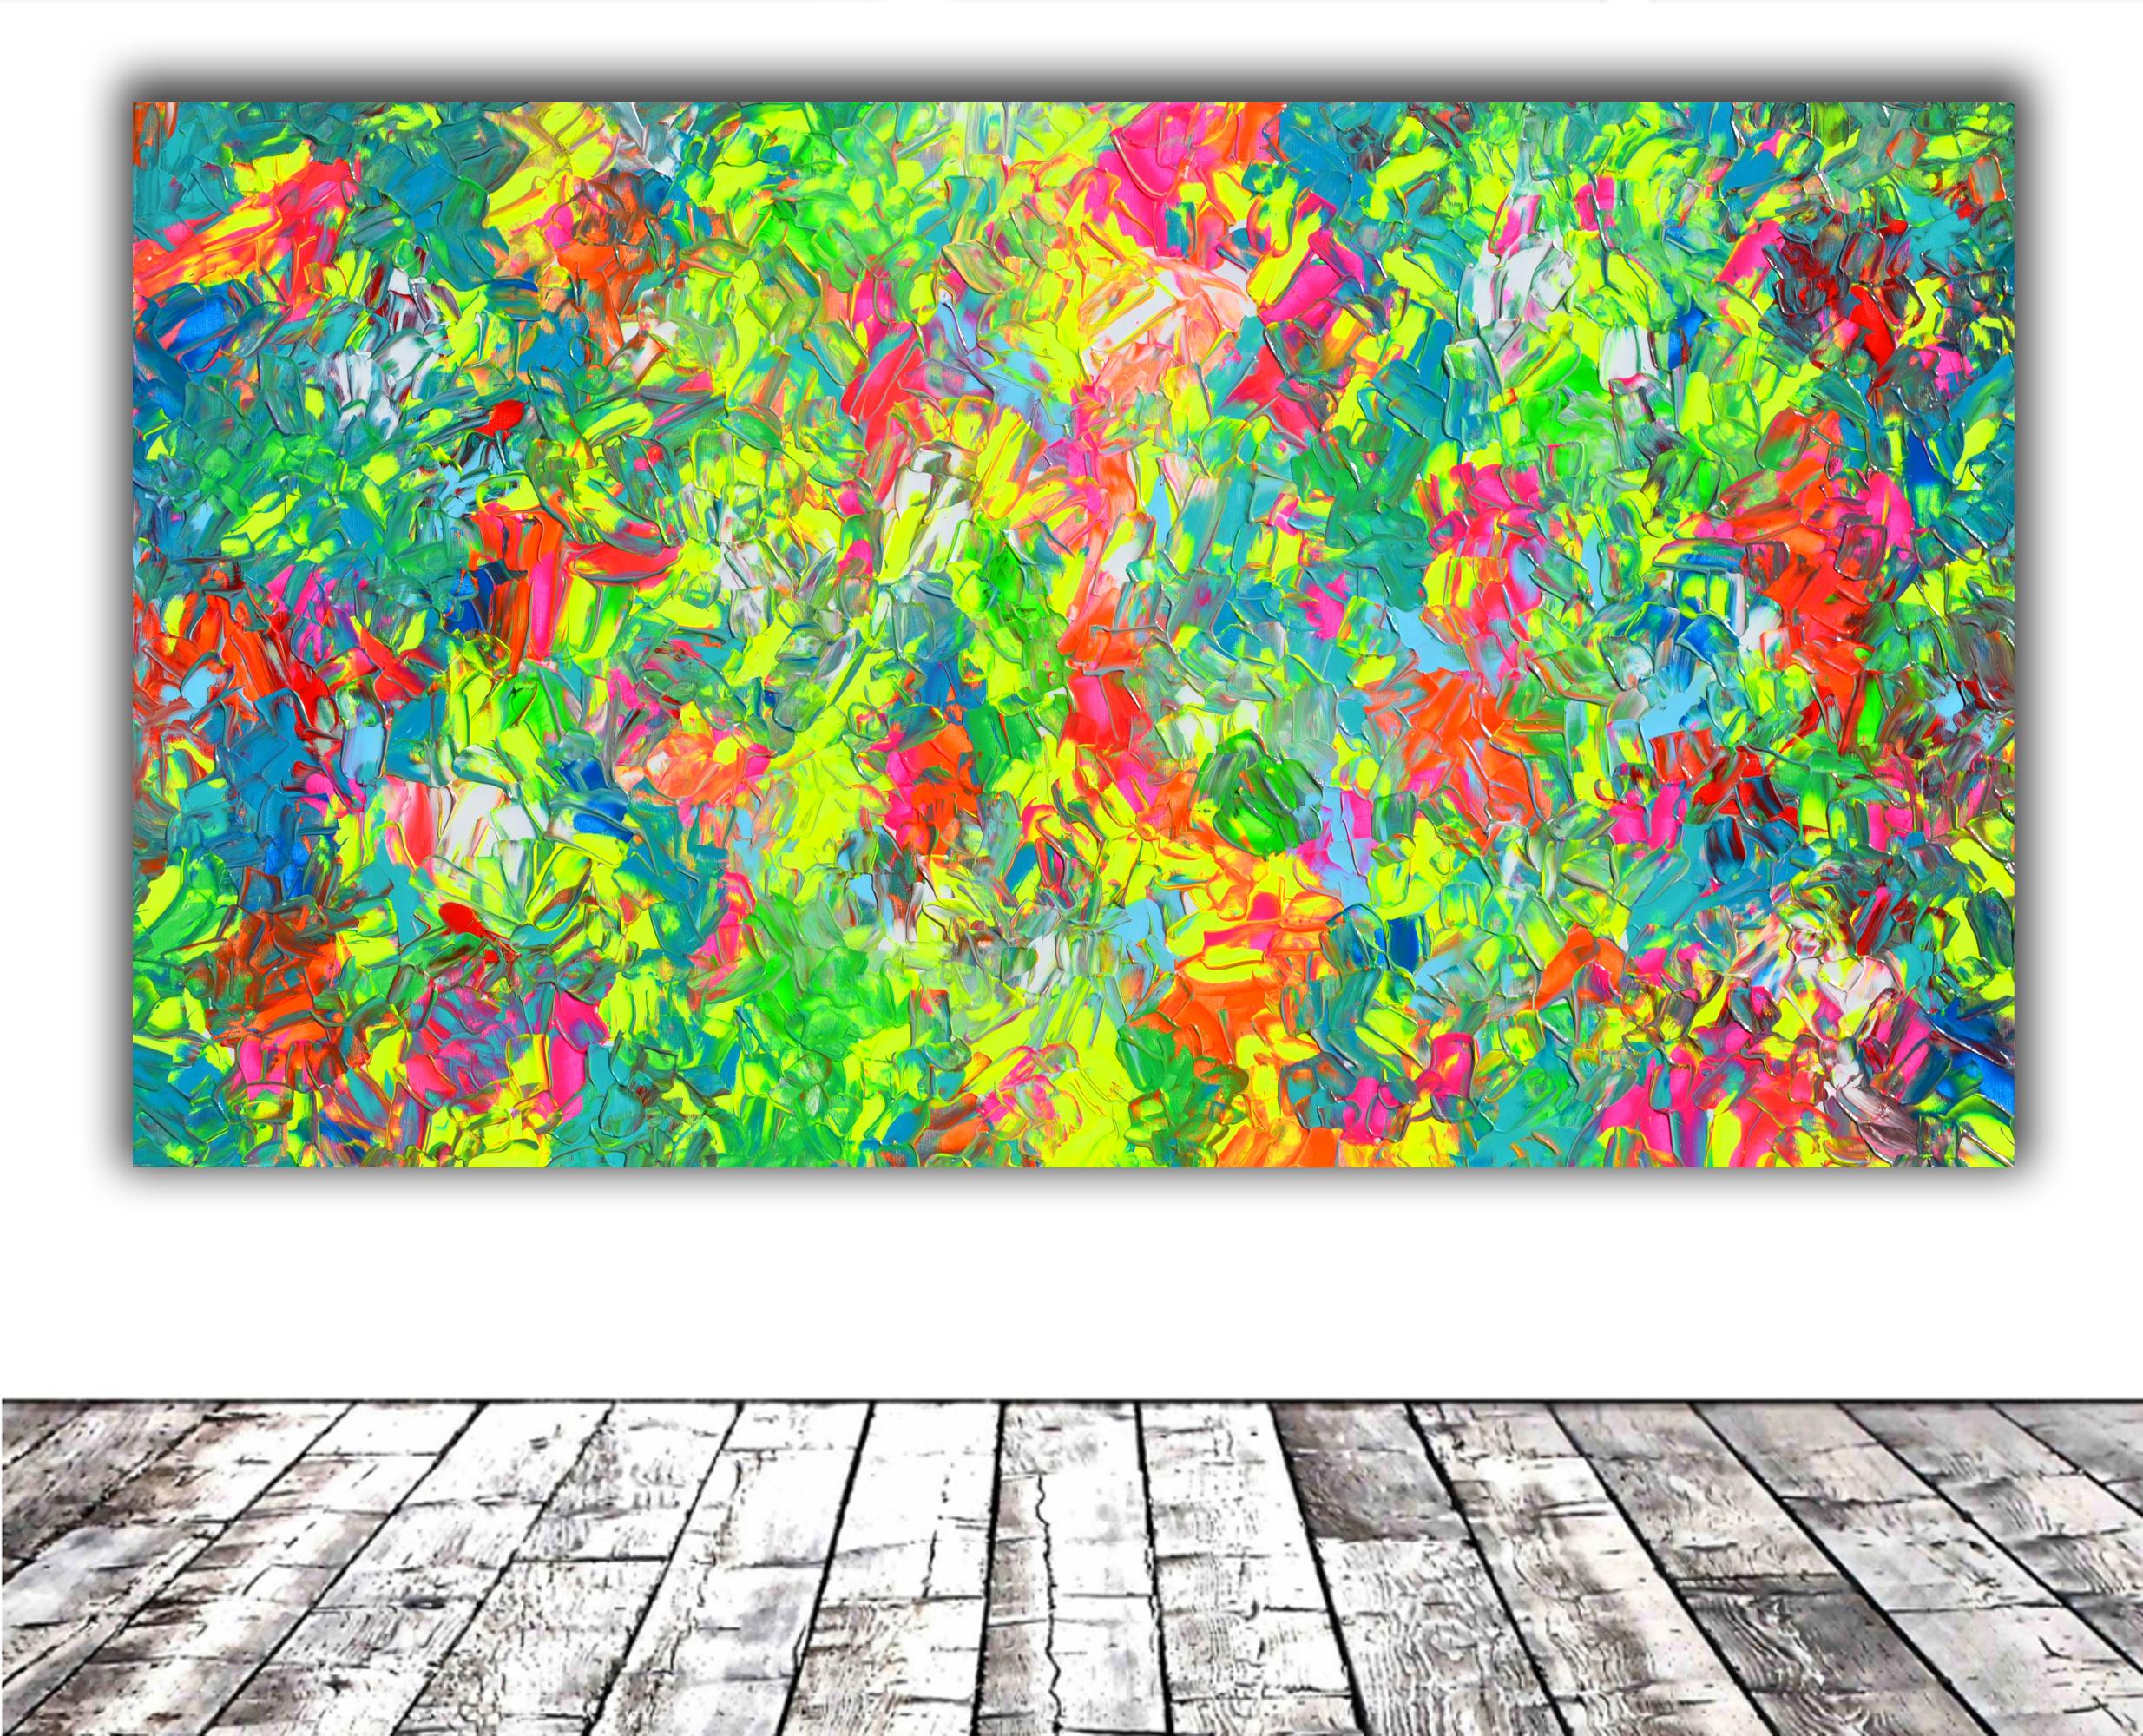 Psychedelic Dyschromy 3 - Large Colorful Abstract Relief Textured Pallet Knife - Painting by SOOS TIBERIU